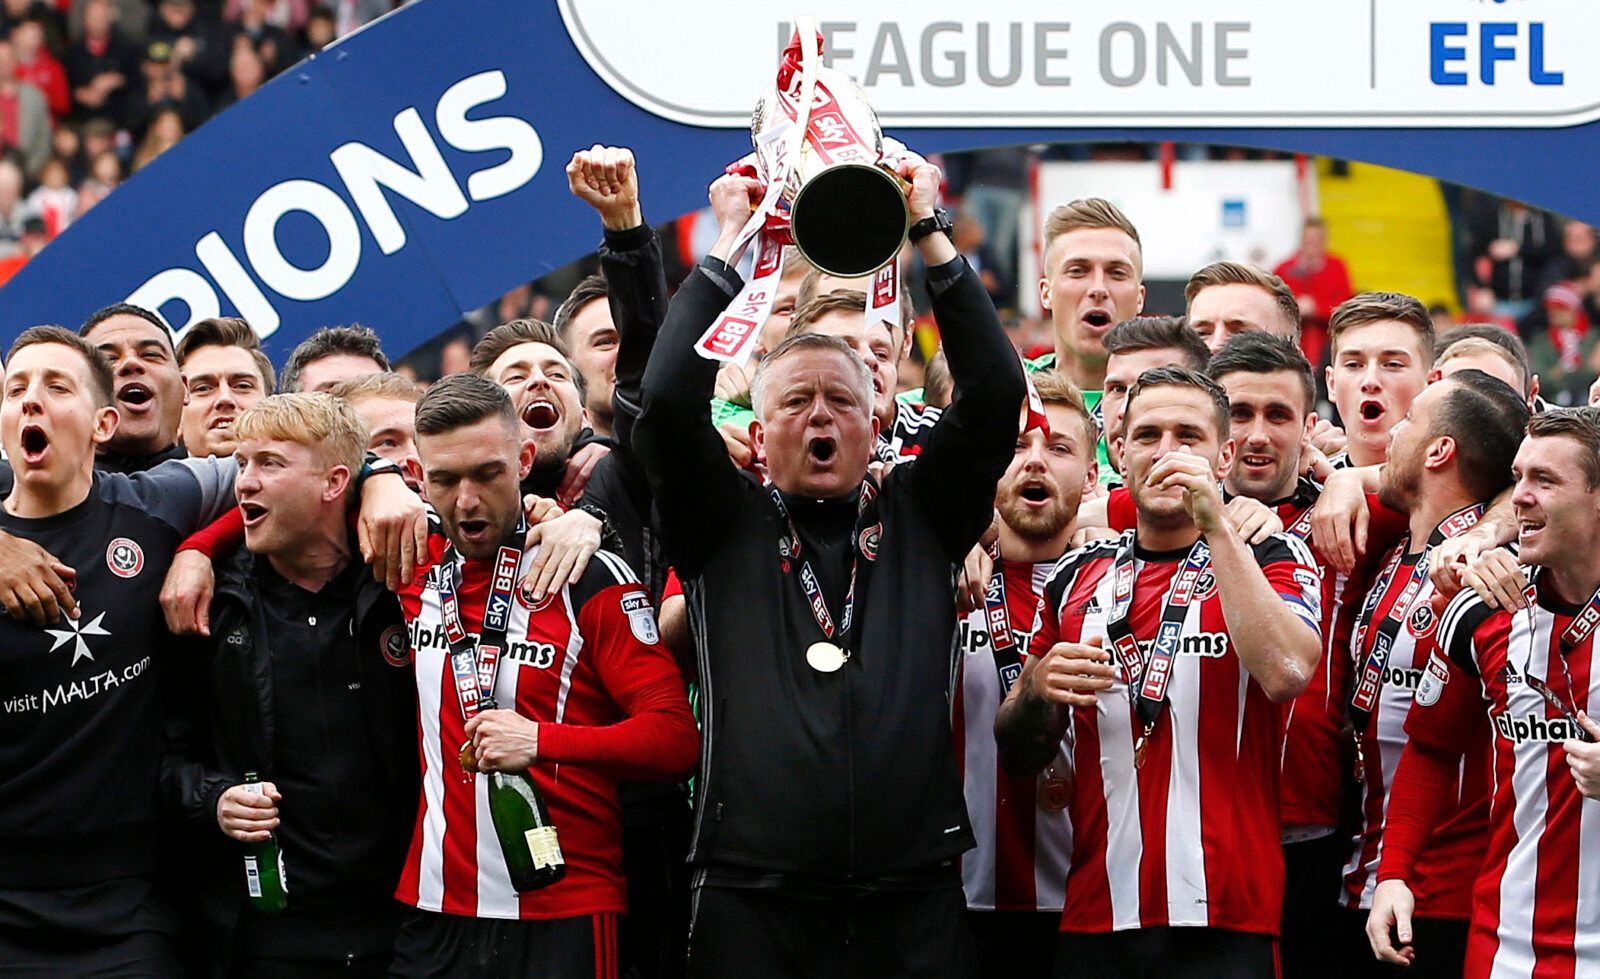 Britain Football Soccer - Sheffield United v Chesterfield - Sky Bet League One - Bramall Lane - 30/4/17 Sheffield United Manager Chris Wilder and players celebrate winning the league with the trophy  Mandatory Credit: Action Images / Craig Brough Livepic EDITORIAL USE ONLY. No use with unauthorized audio, video, data, fixture lists, club/league logos or 